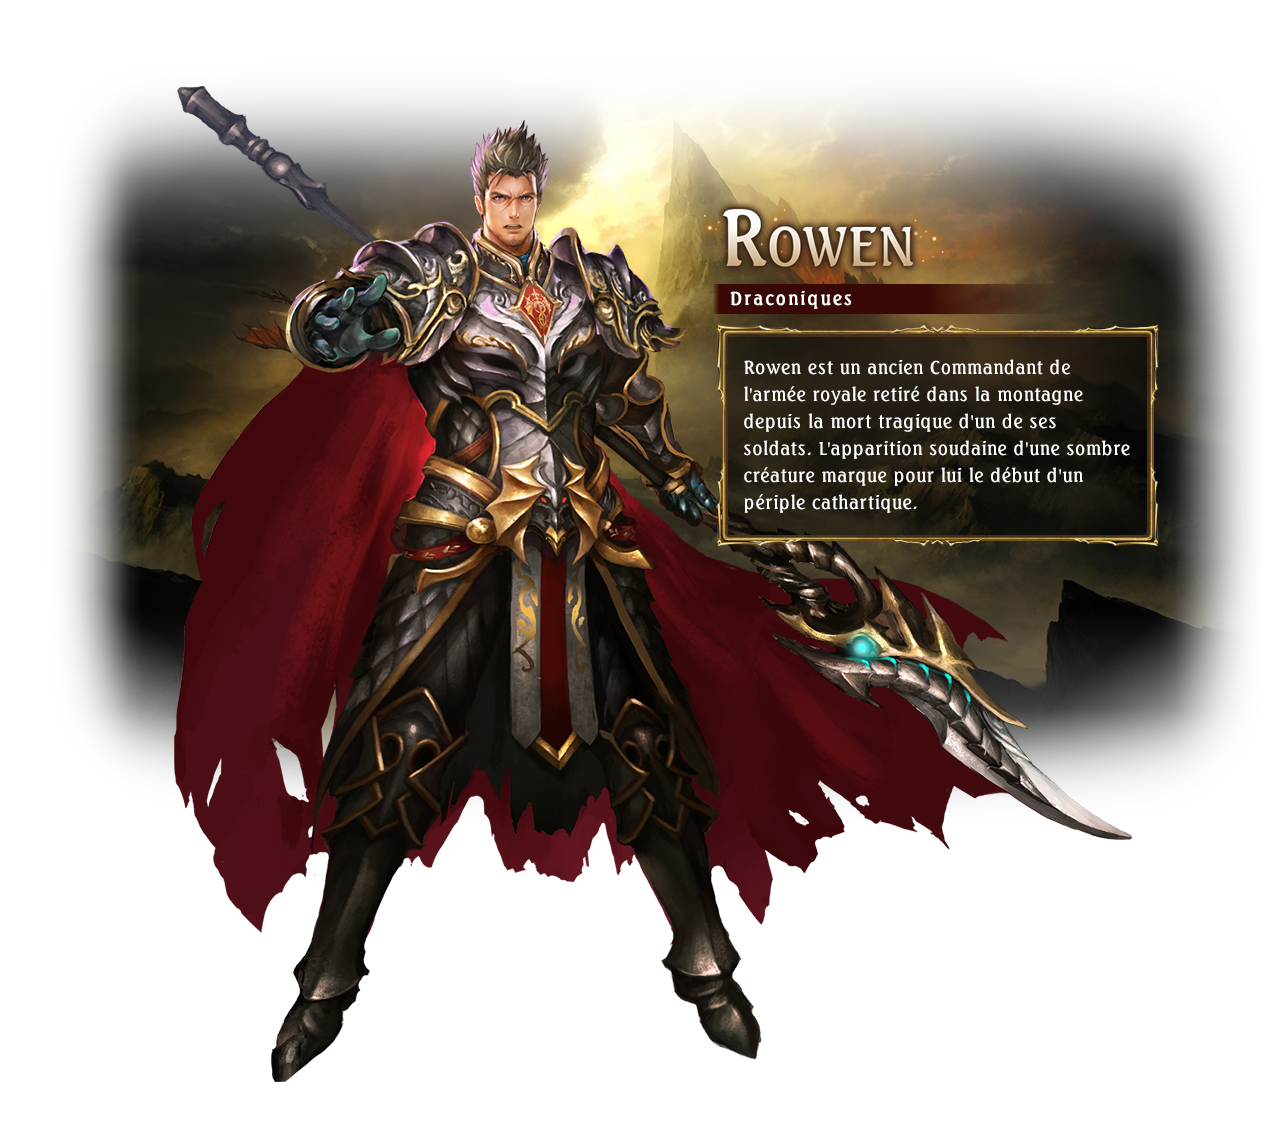 Rowen / Class: Dragoncraft / Rowen is a former commander in the royal army. His life changed when a ferocious dragon attacked his squad. He is now trying to come to terms with the consequences.